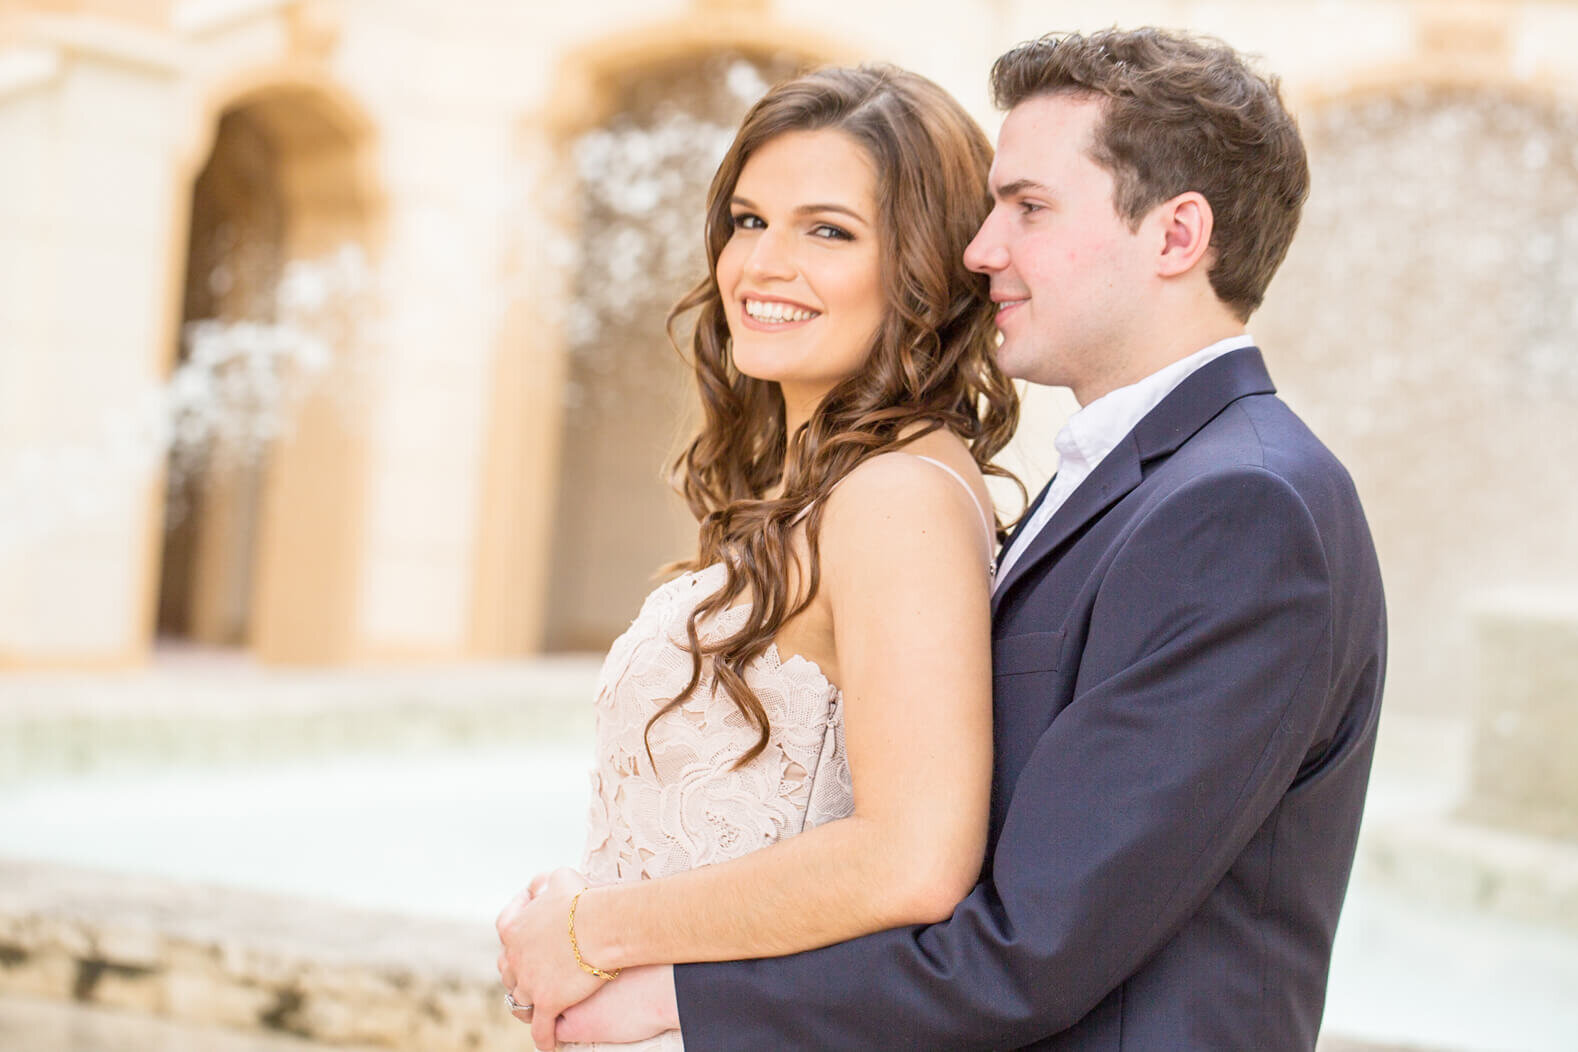 engagement-photo-session-biltmore-hotel-miami-coral-gables-03